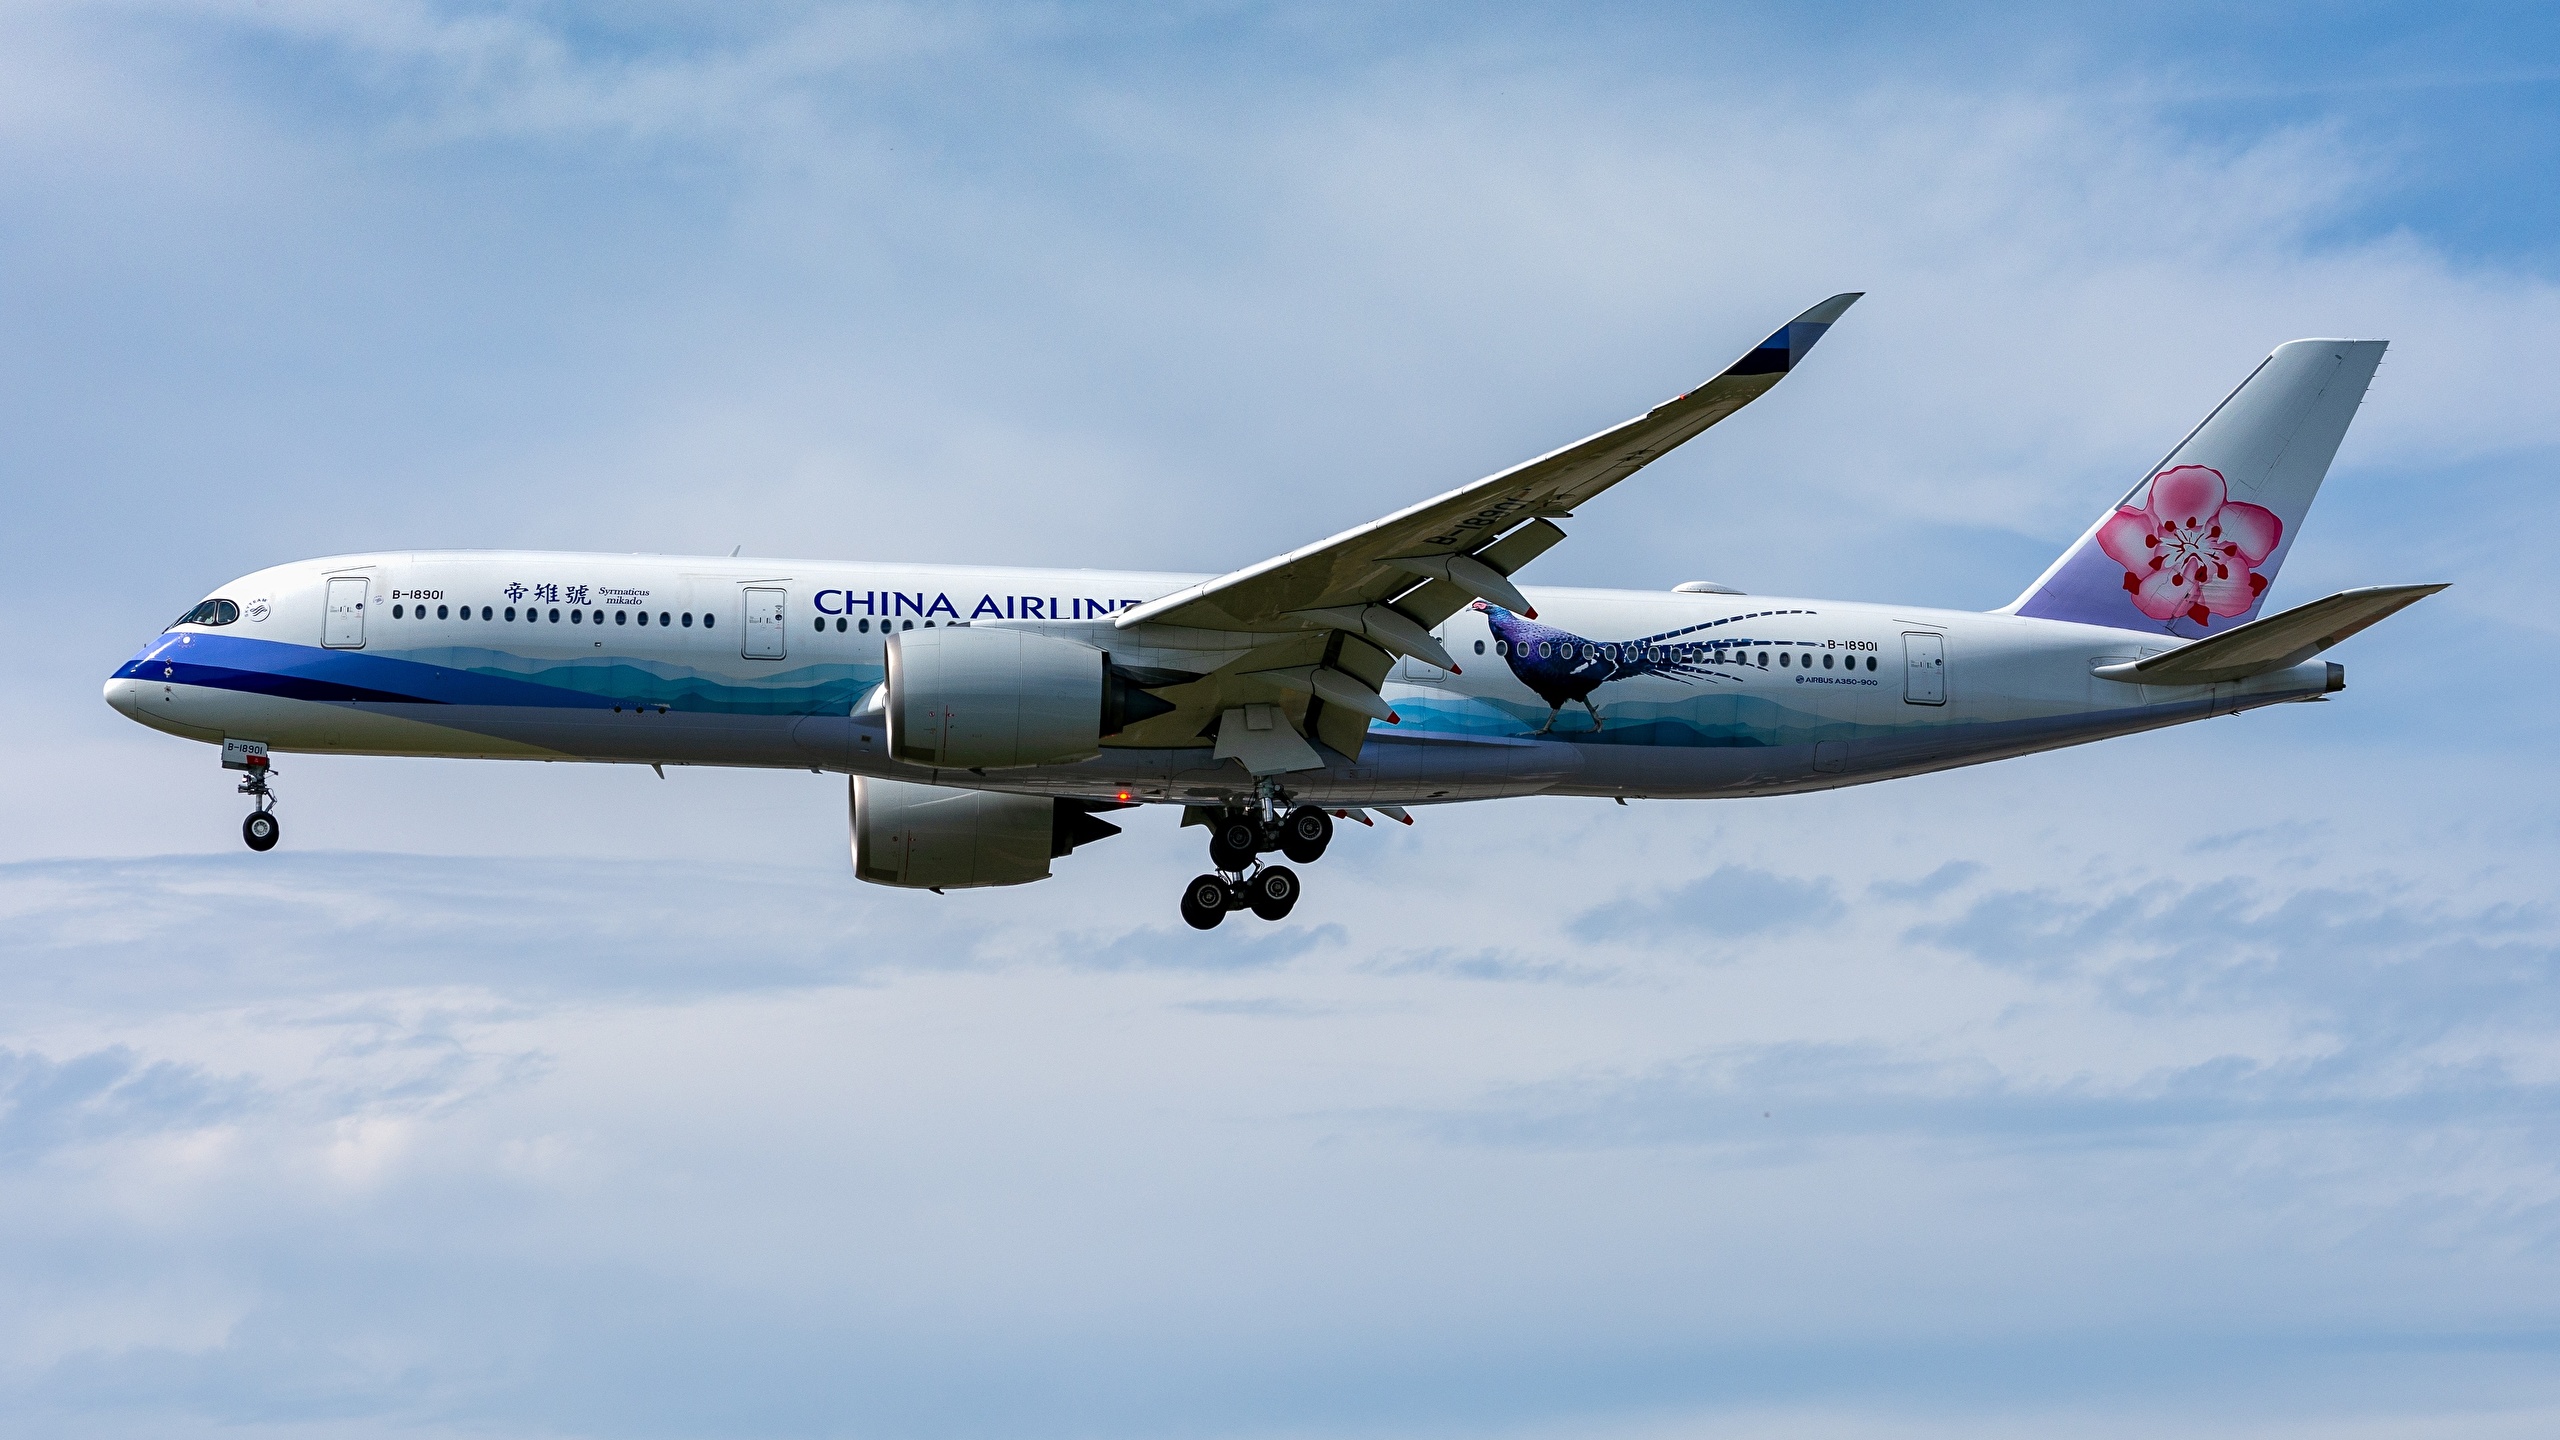 Photos Airbus Passenger Airplanes A350 900 China Airlines 2560x1440 Images, Photos, Reviews